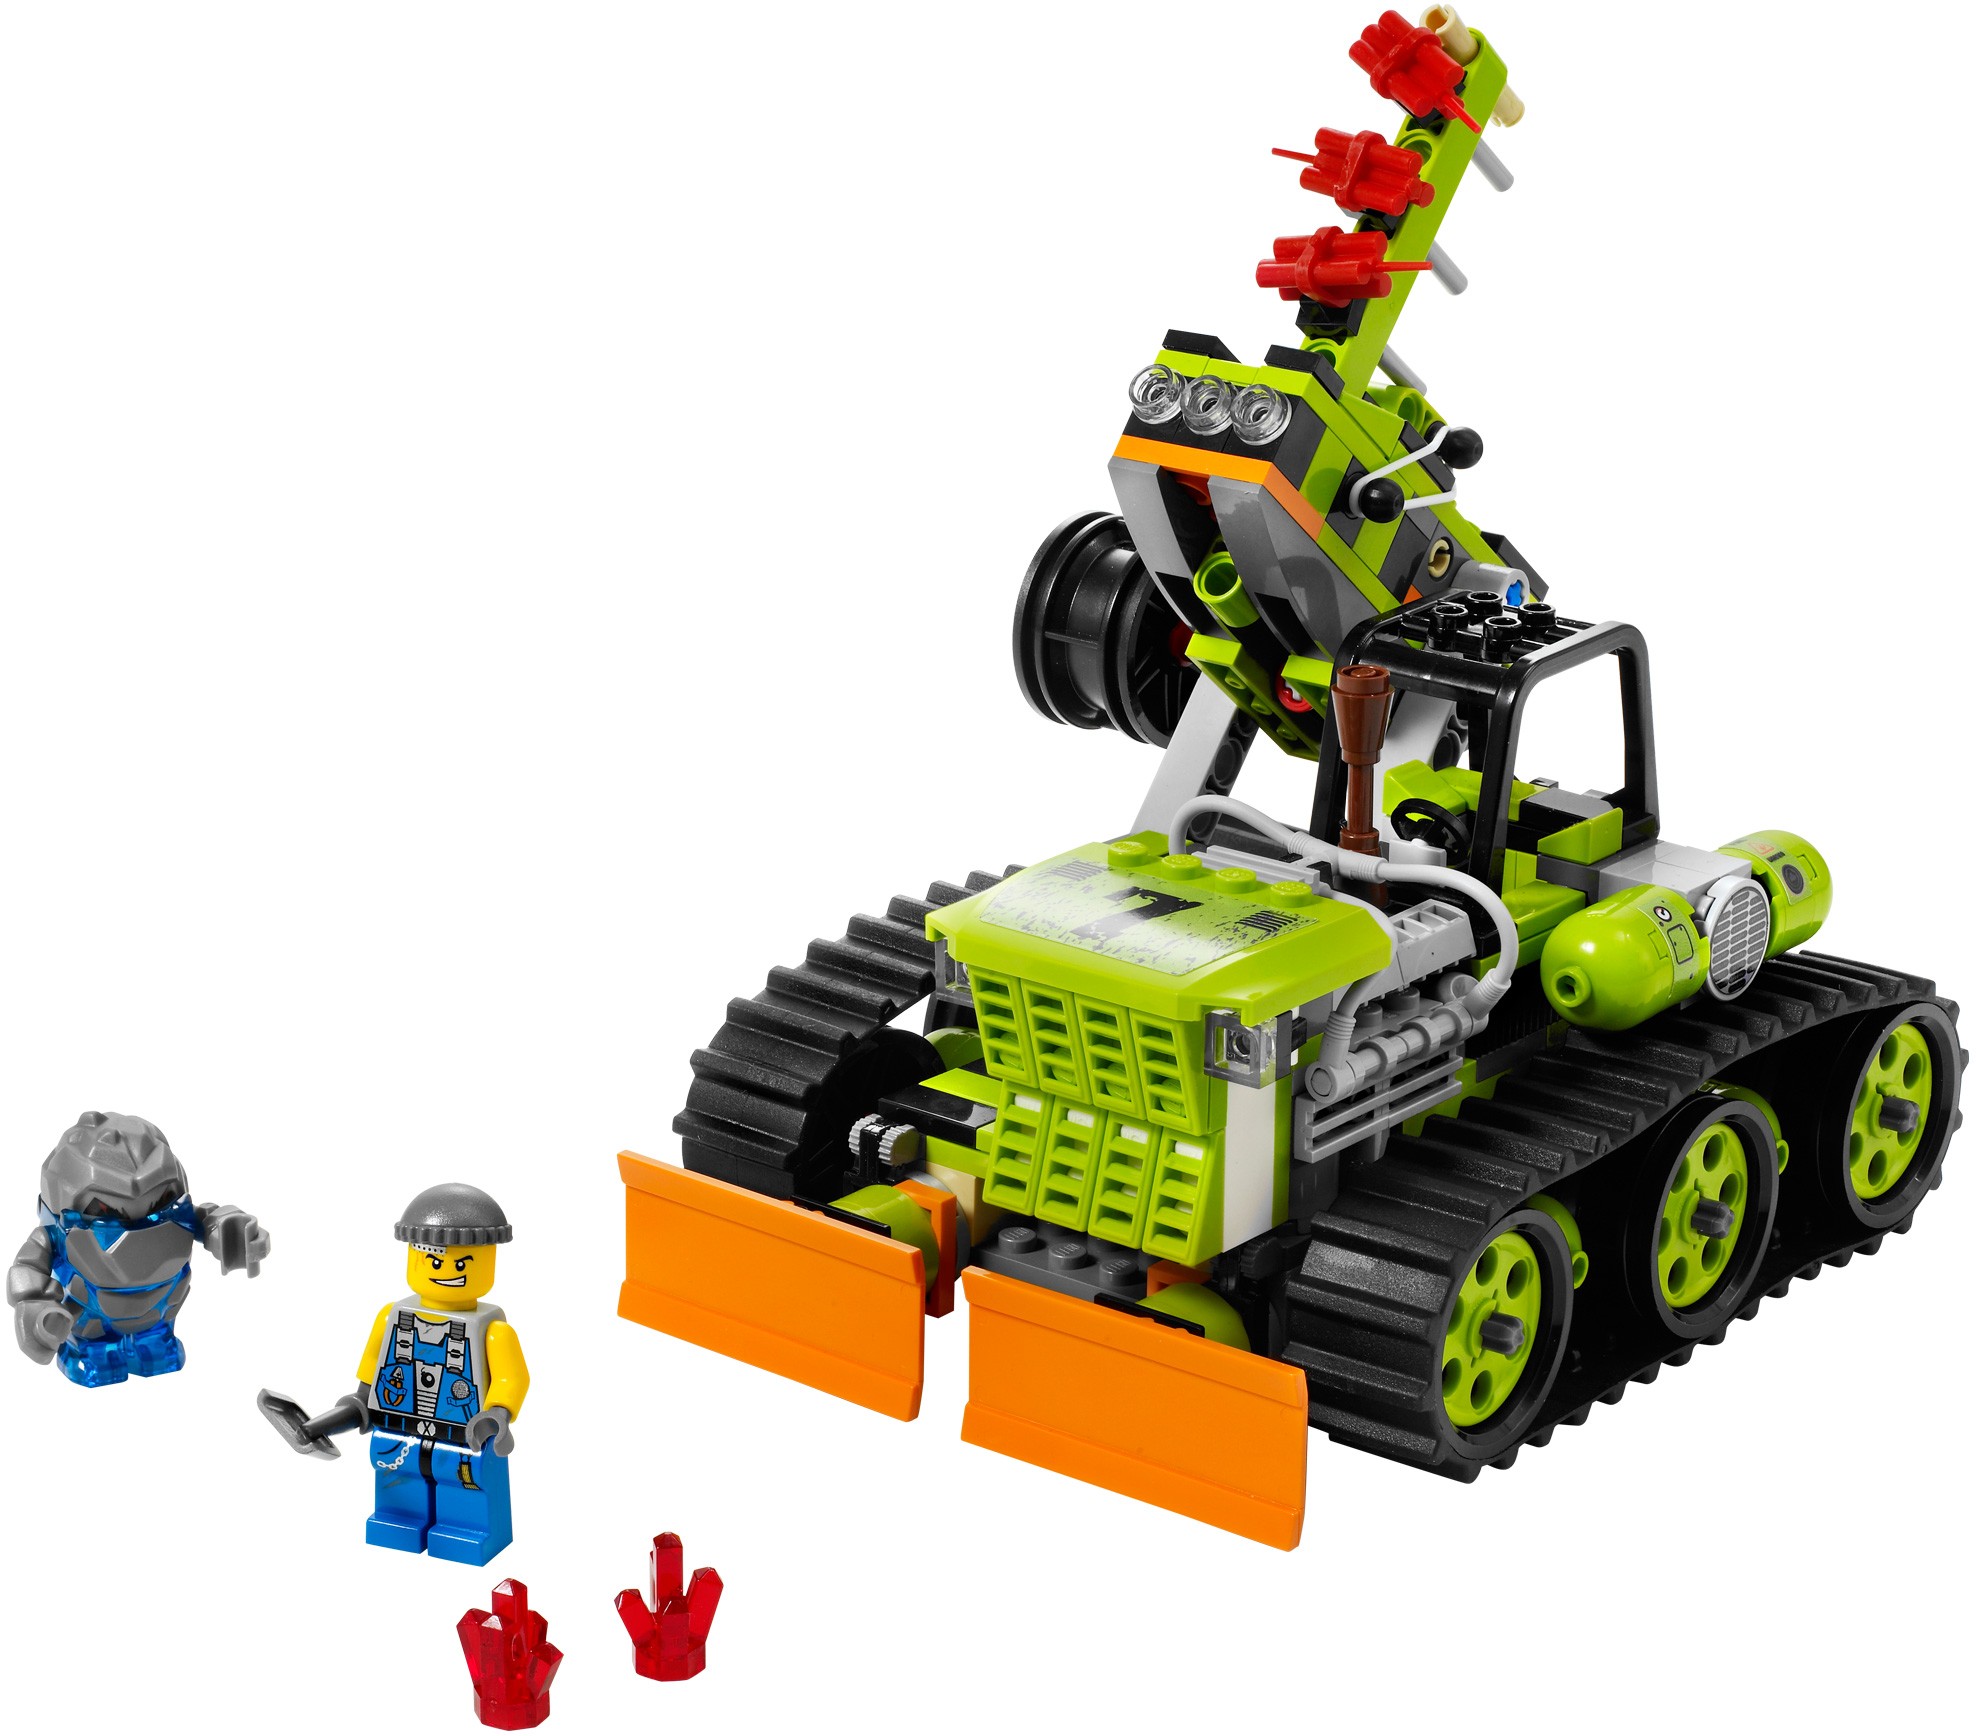 PICK 1 LEGO POWER MINERS SETS 8188 8190 8956 8957 8958 8959 8960 8962 8963 8707 